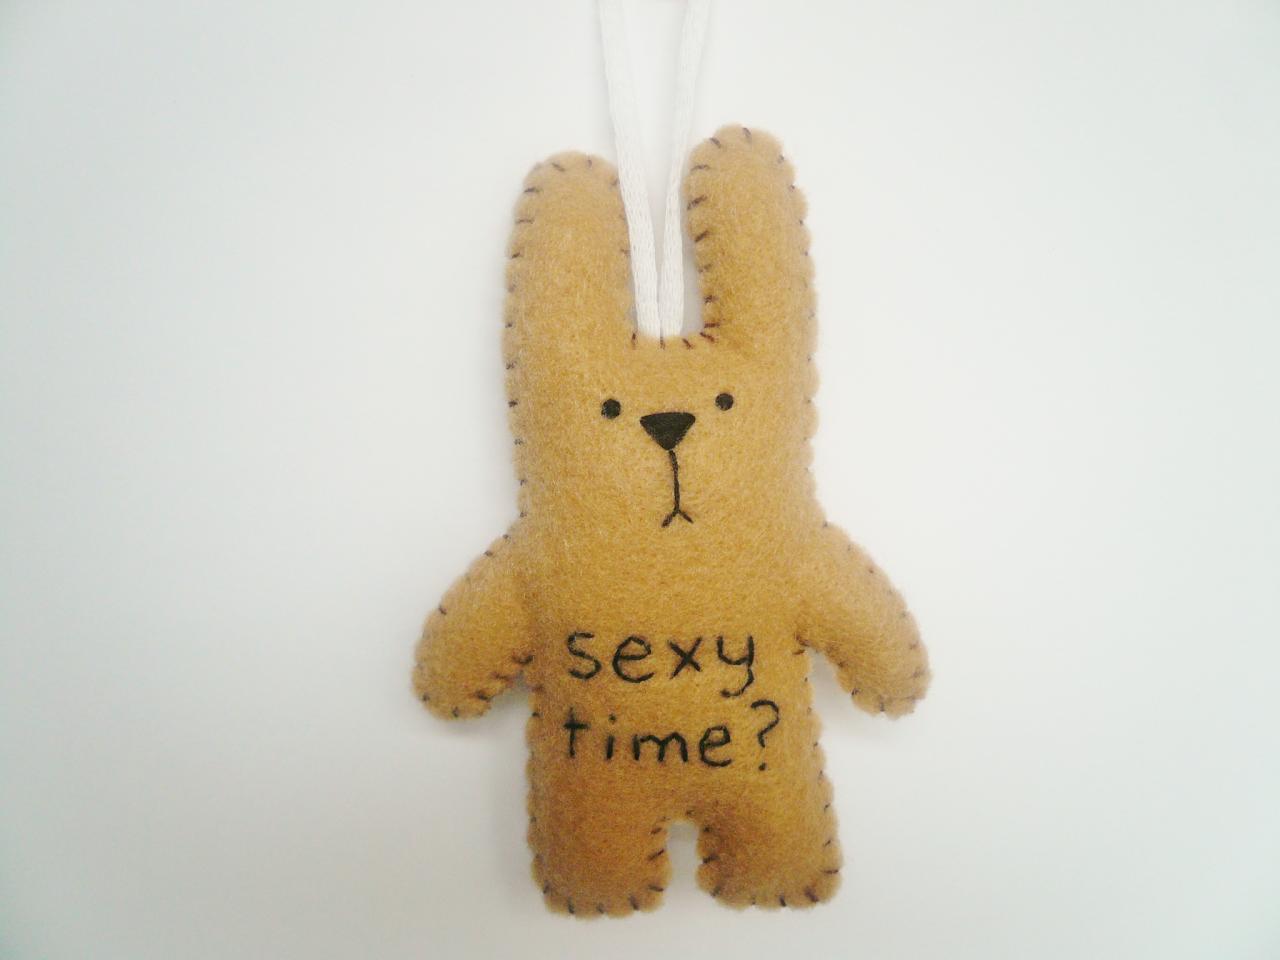 Christmas tree ornament decoration or gift funny bunny rabbit - Sexy time